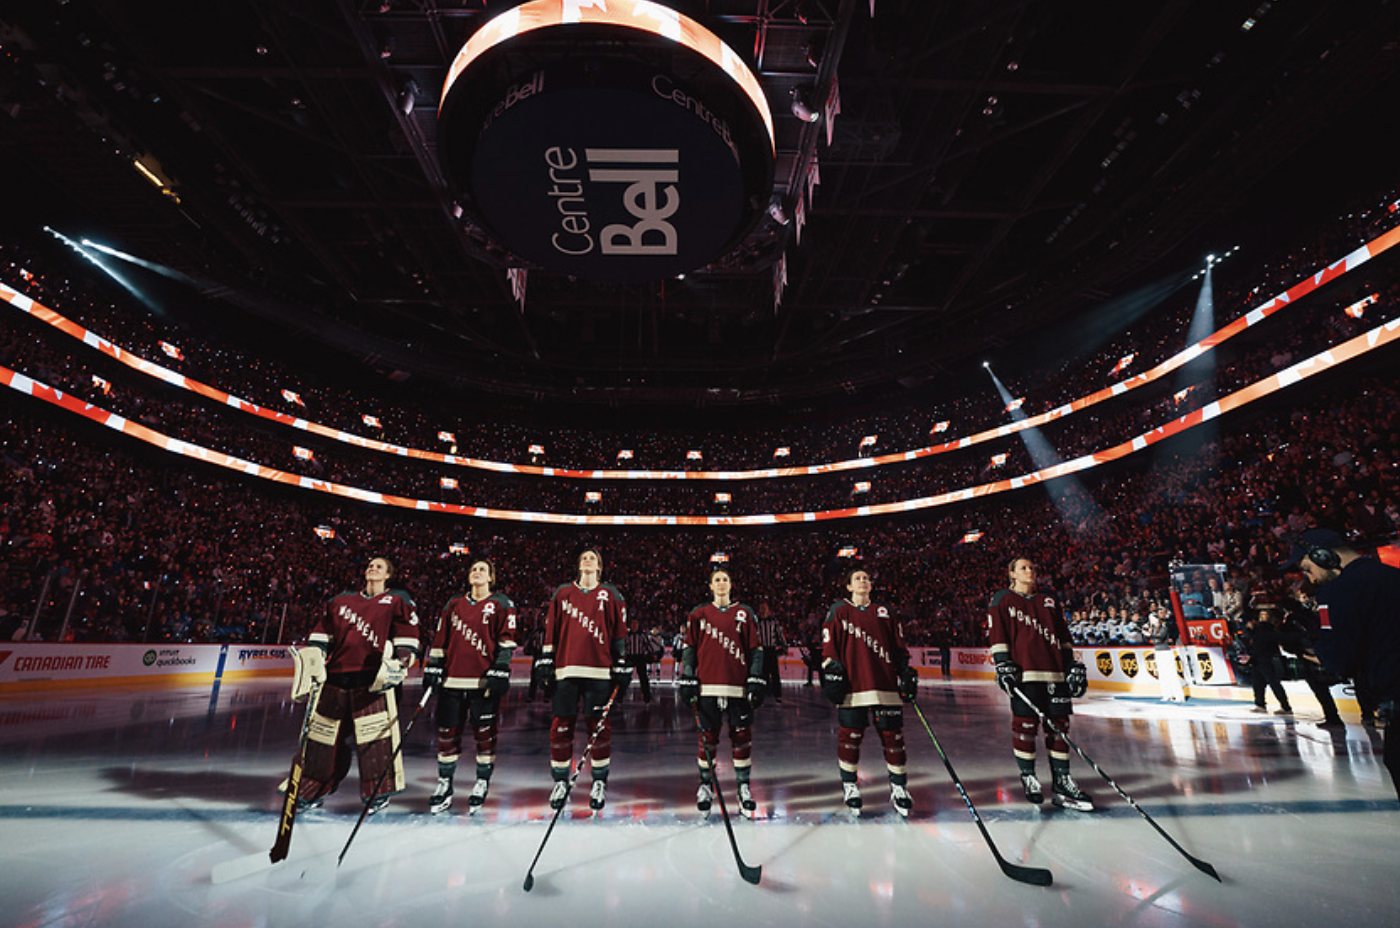 Montréal players stand on the blue line. There are five skaters and one goaltender. Their helmets are off, and they are wearing maroon home jerseys.